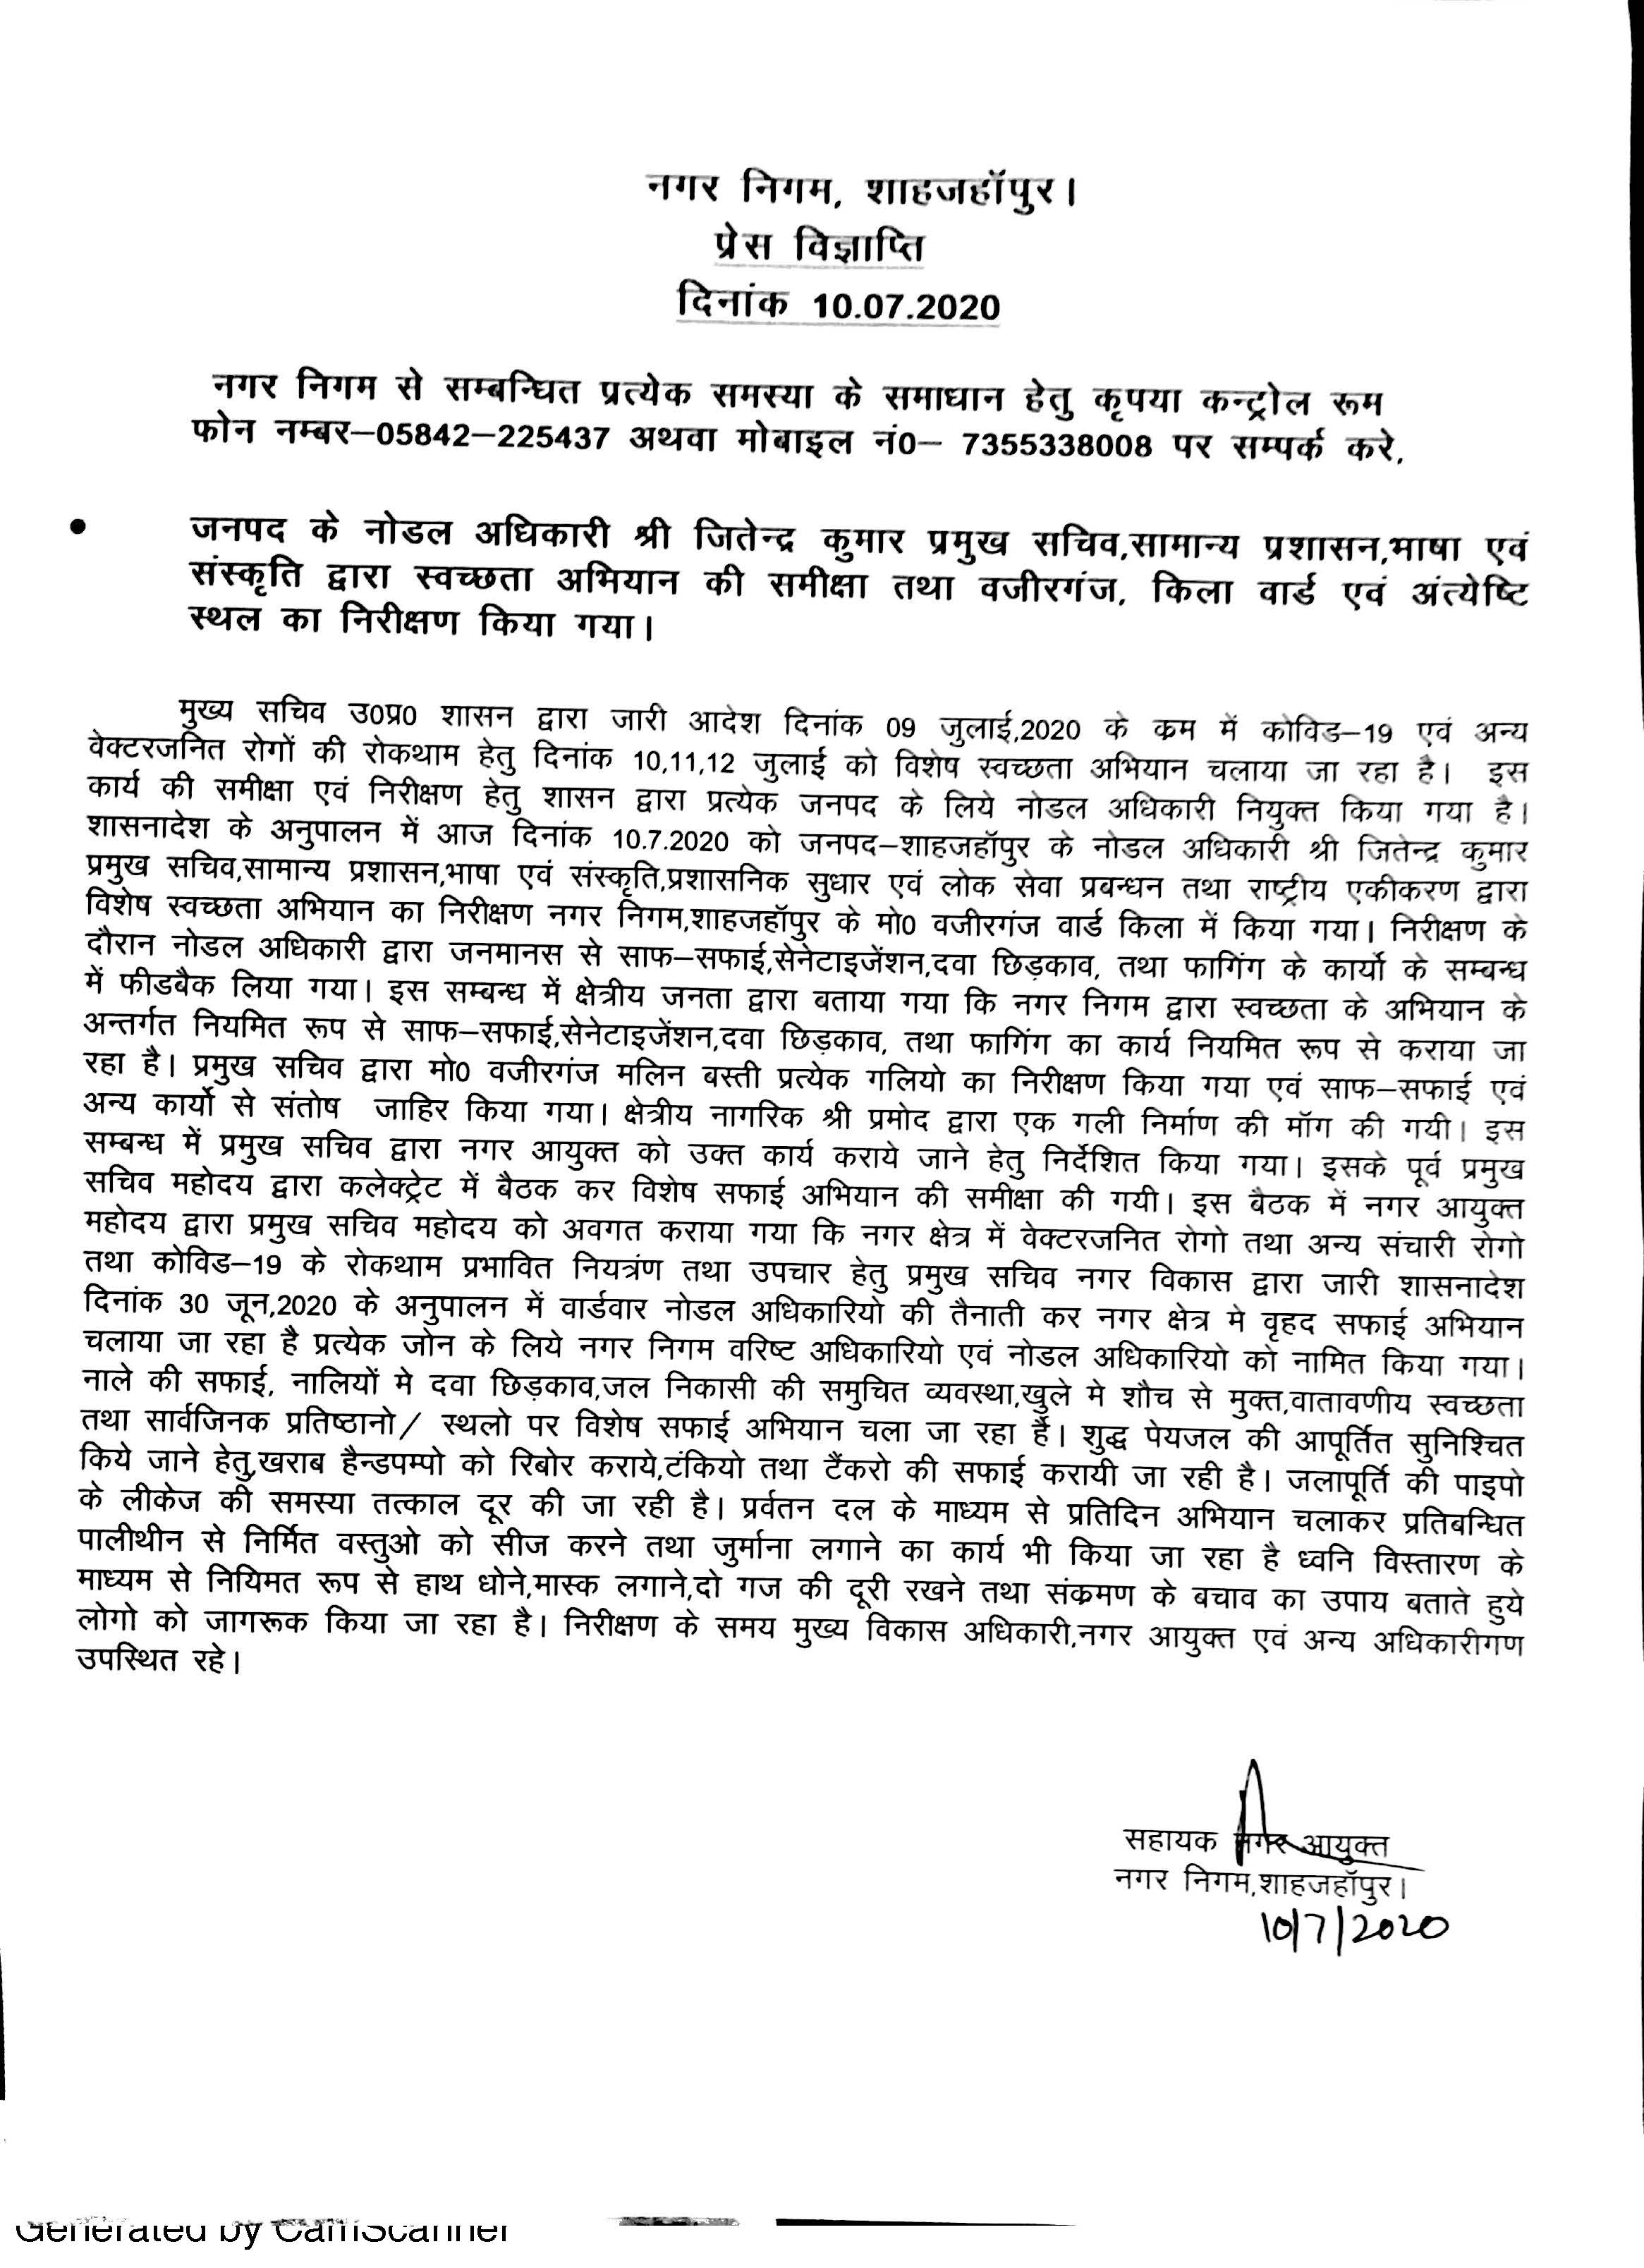 Regarding press release against the sanitation works carried out in the city on 10.07.2020 according to the guidelines of Municipal Commissioner